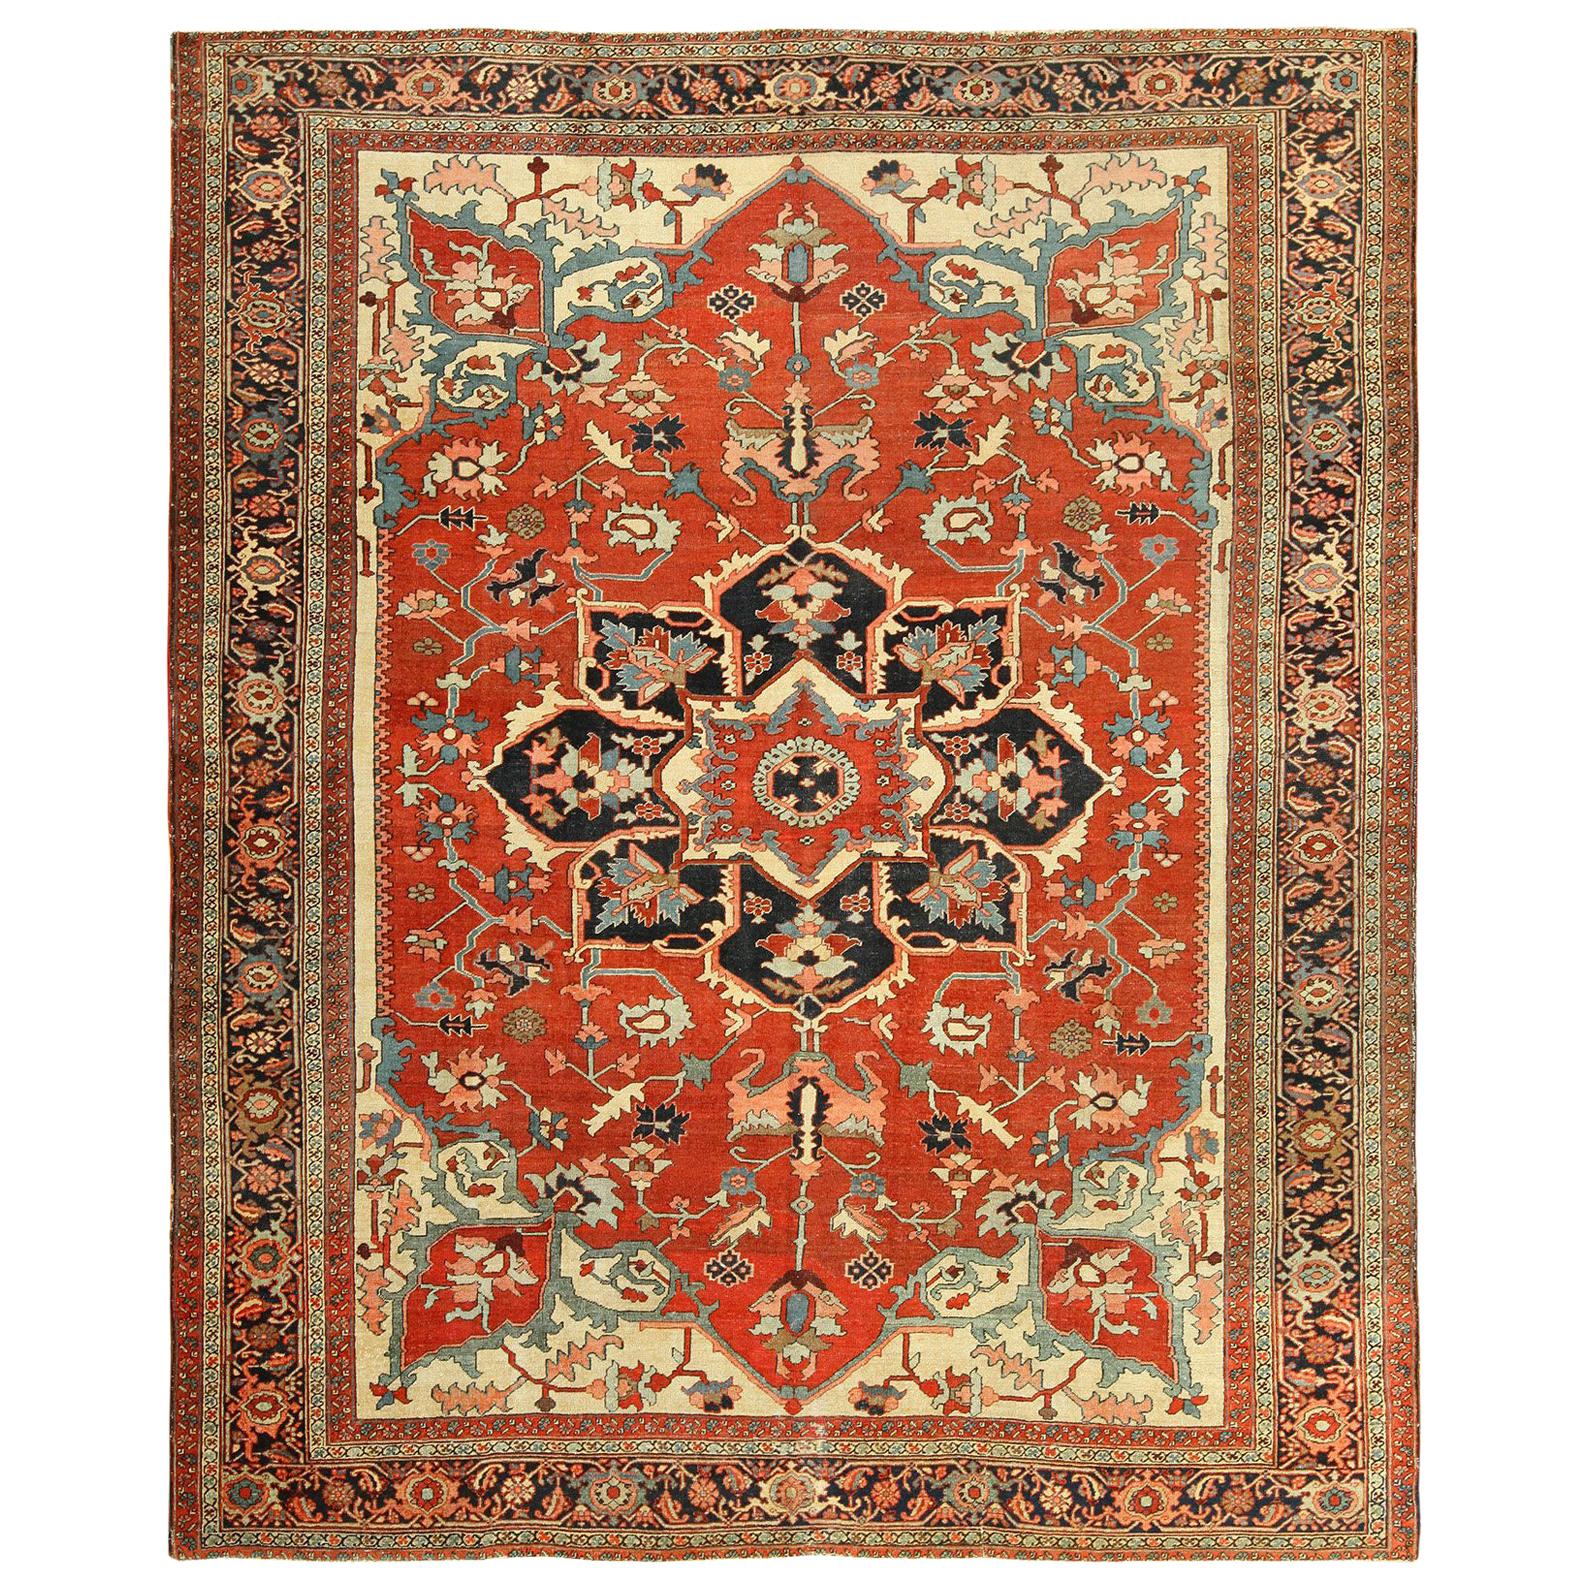 Antique Serapi Persian Rug. Size: 9 ft x 10 ft 9 in 